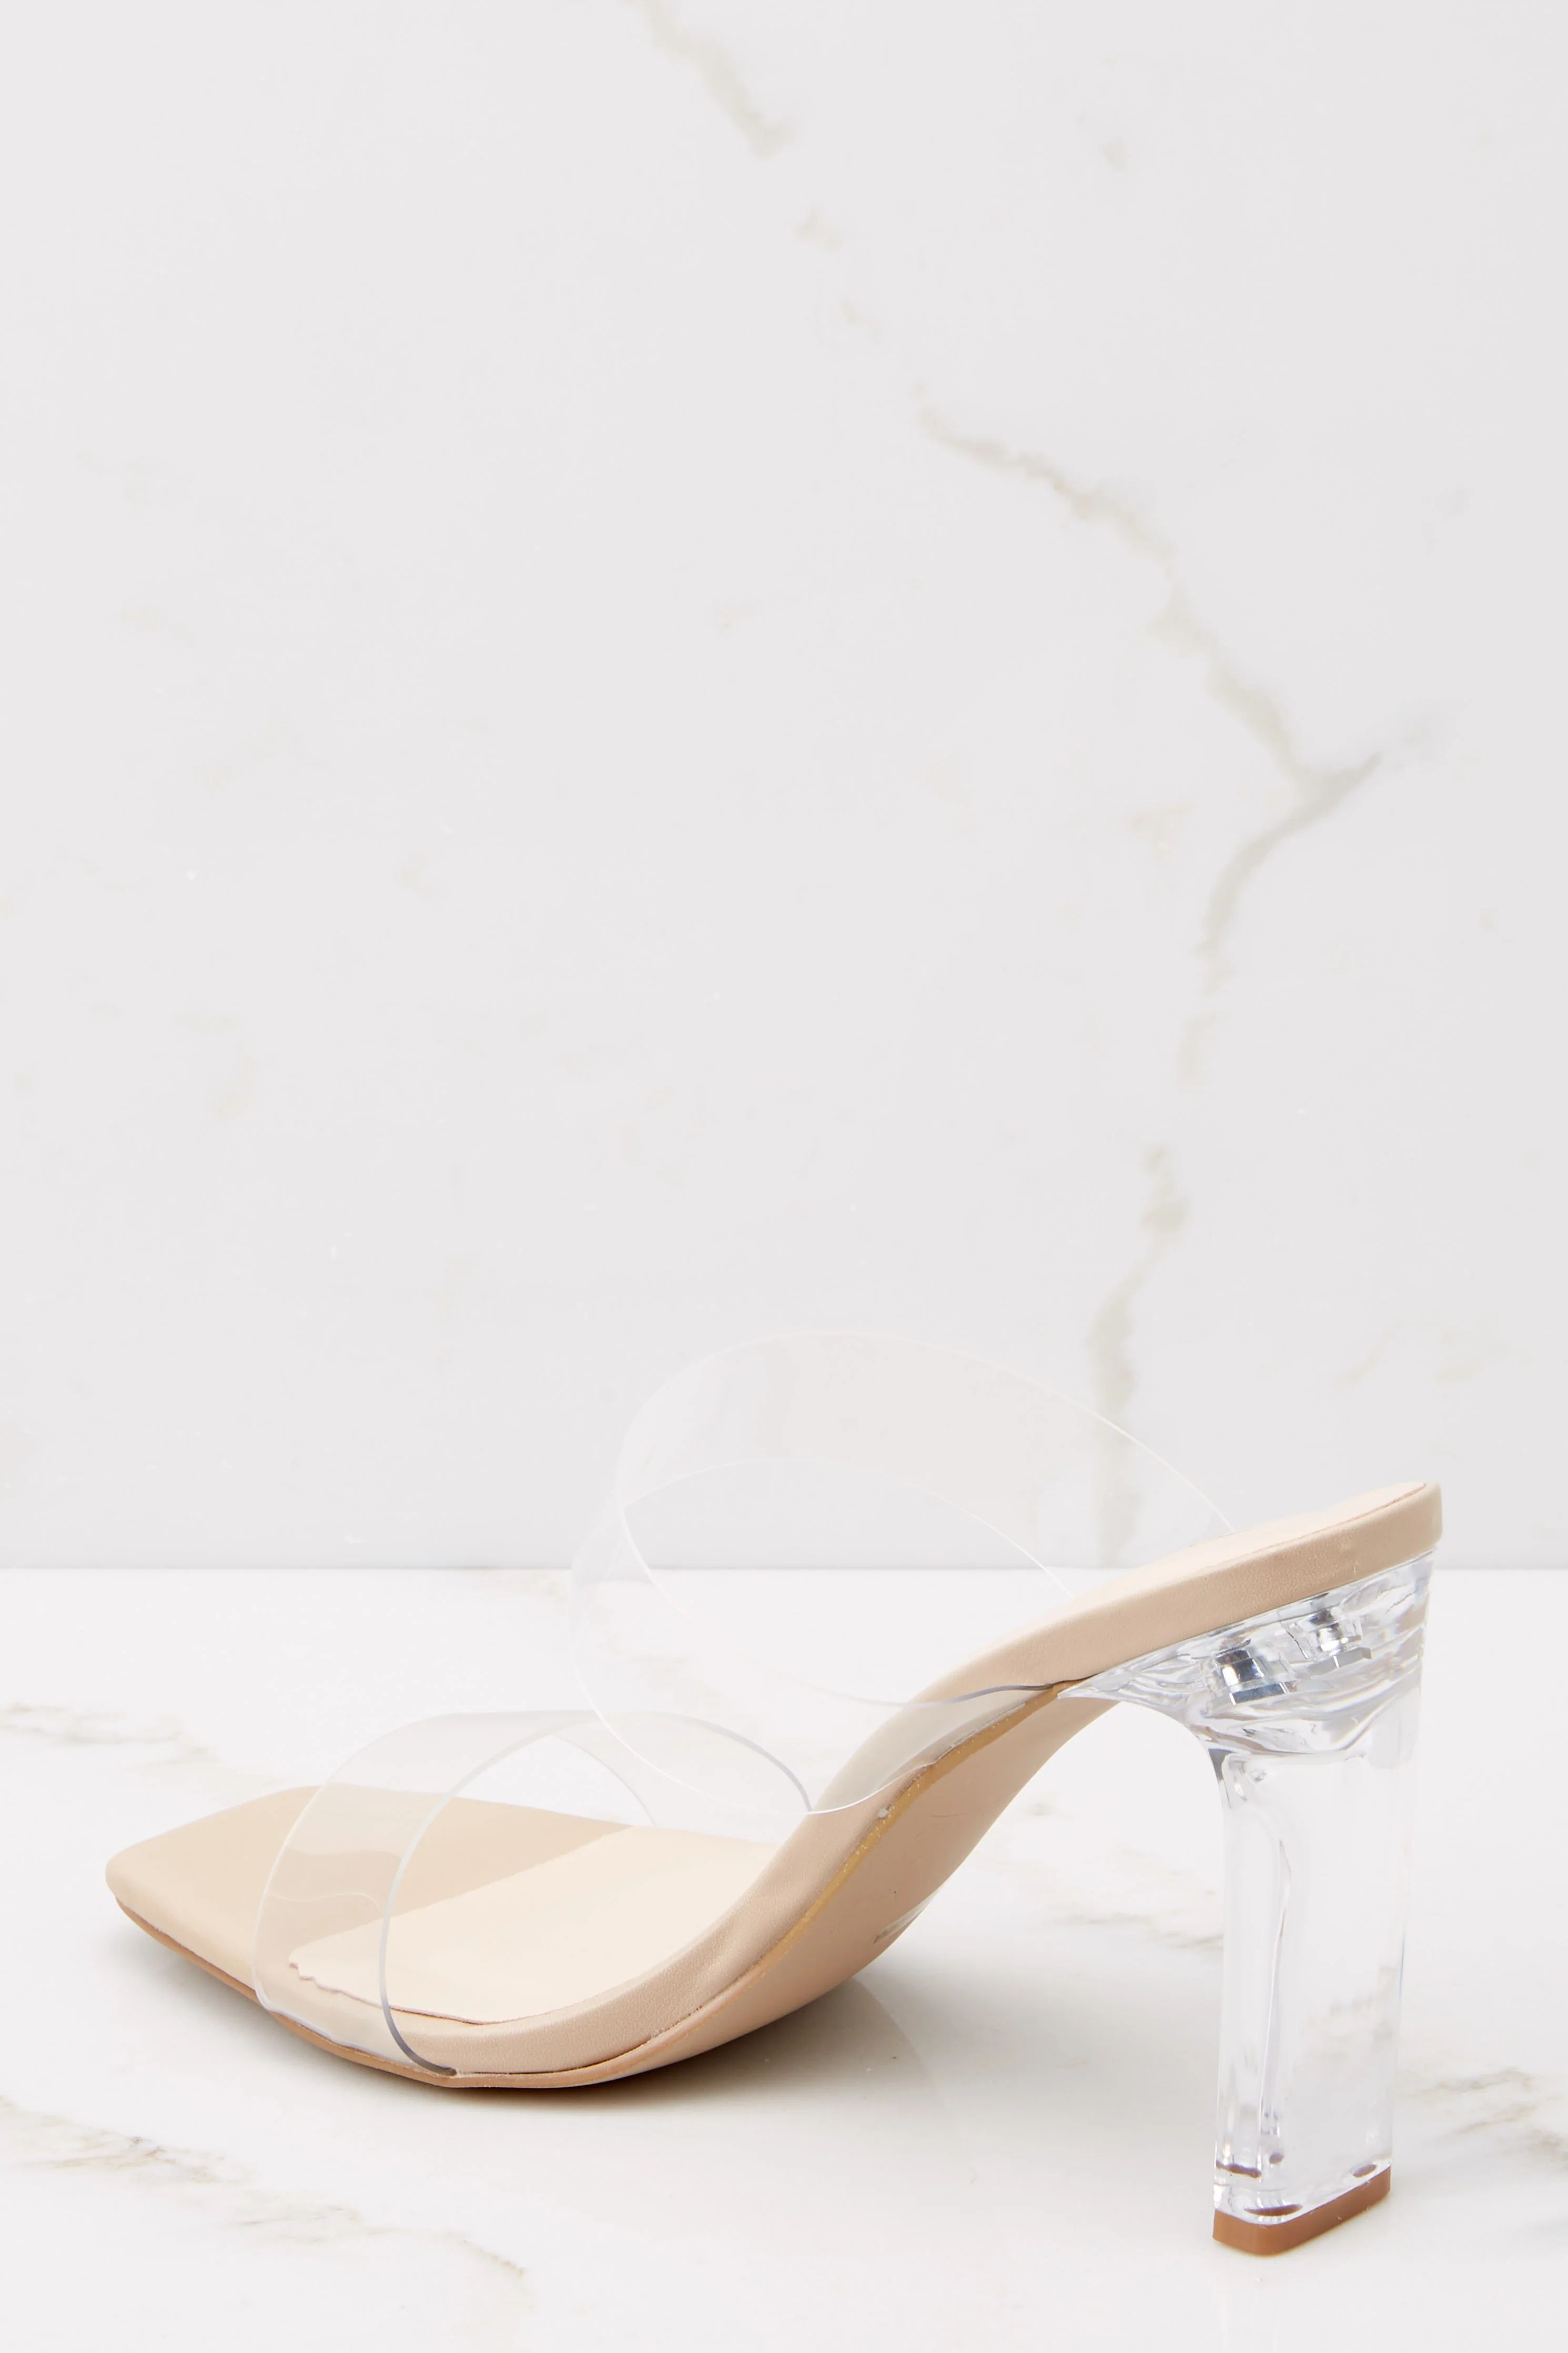 Really Love These Nude And Clear Heels | Red Dress 